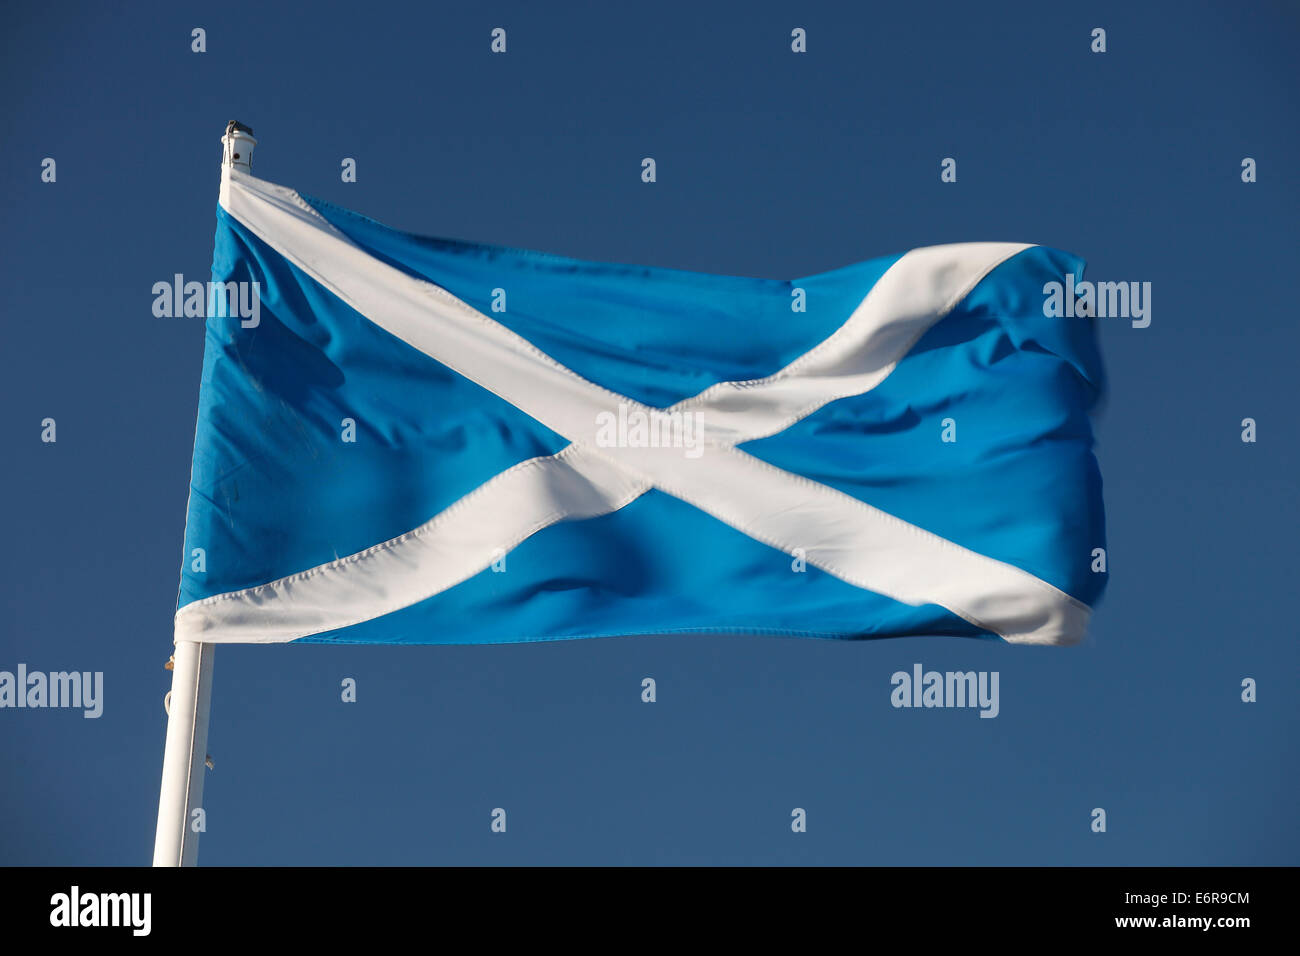 Scottish flag saltire cross of st andrew flapping in the breeeze against a deep blue sky. Stock Photo